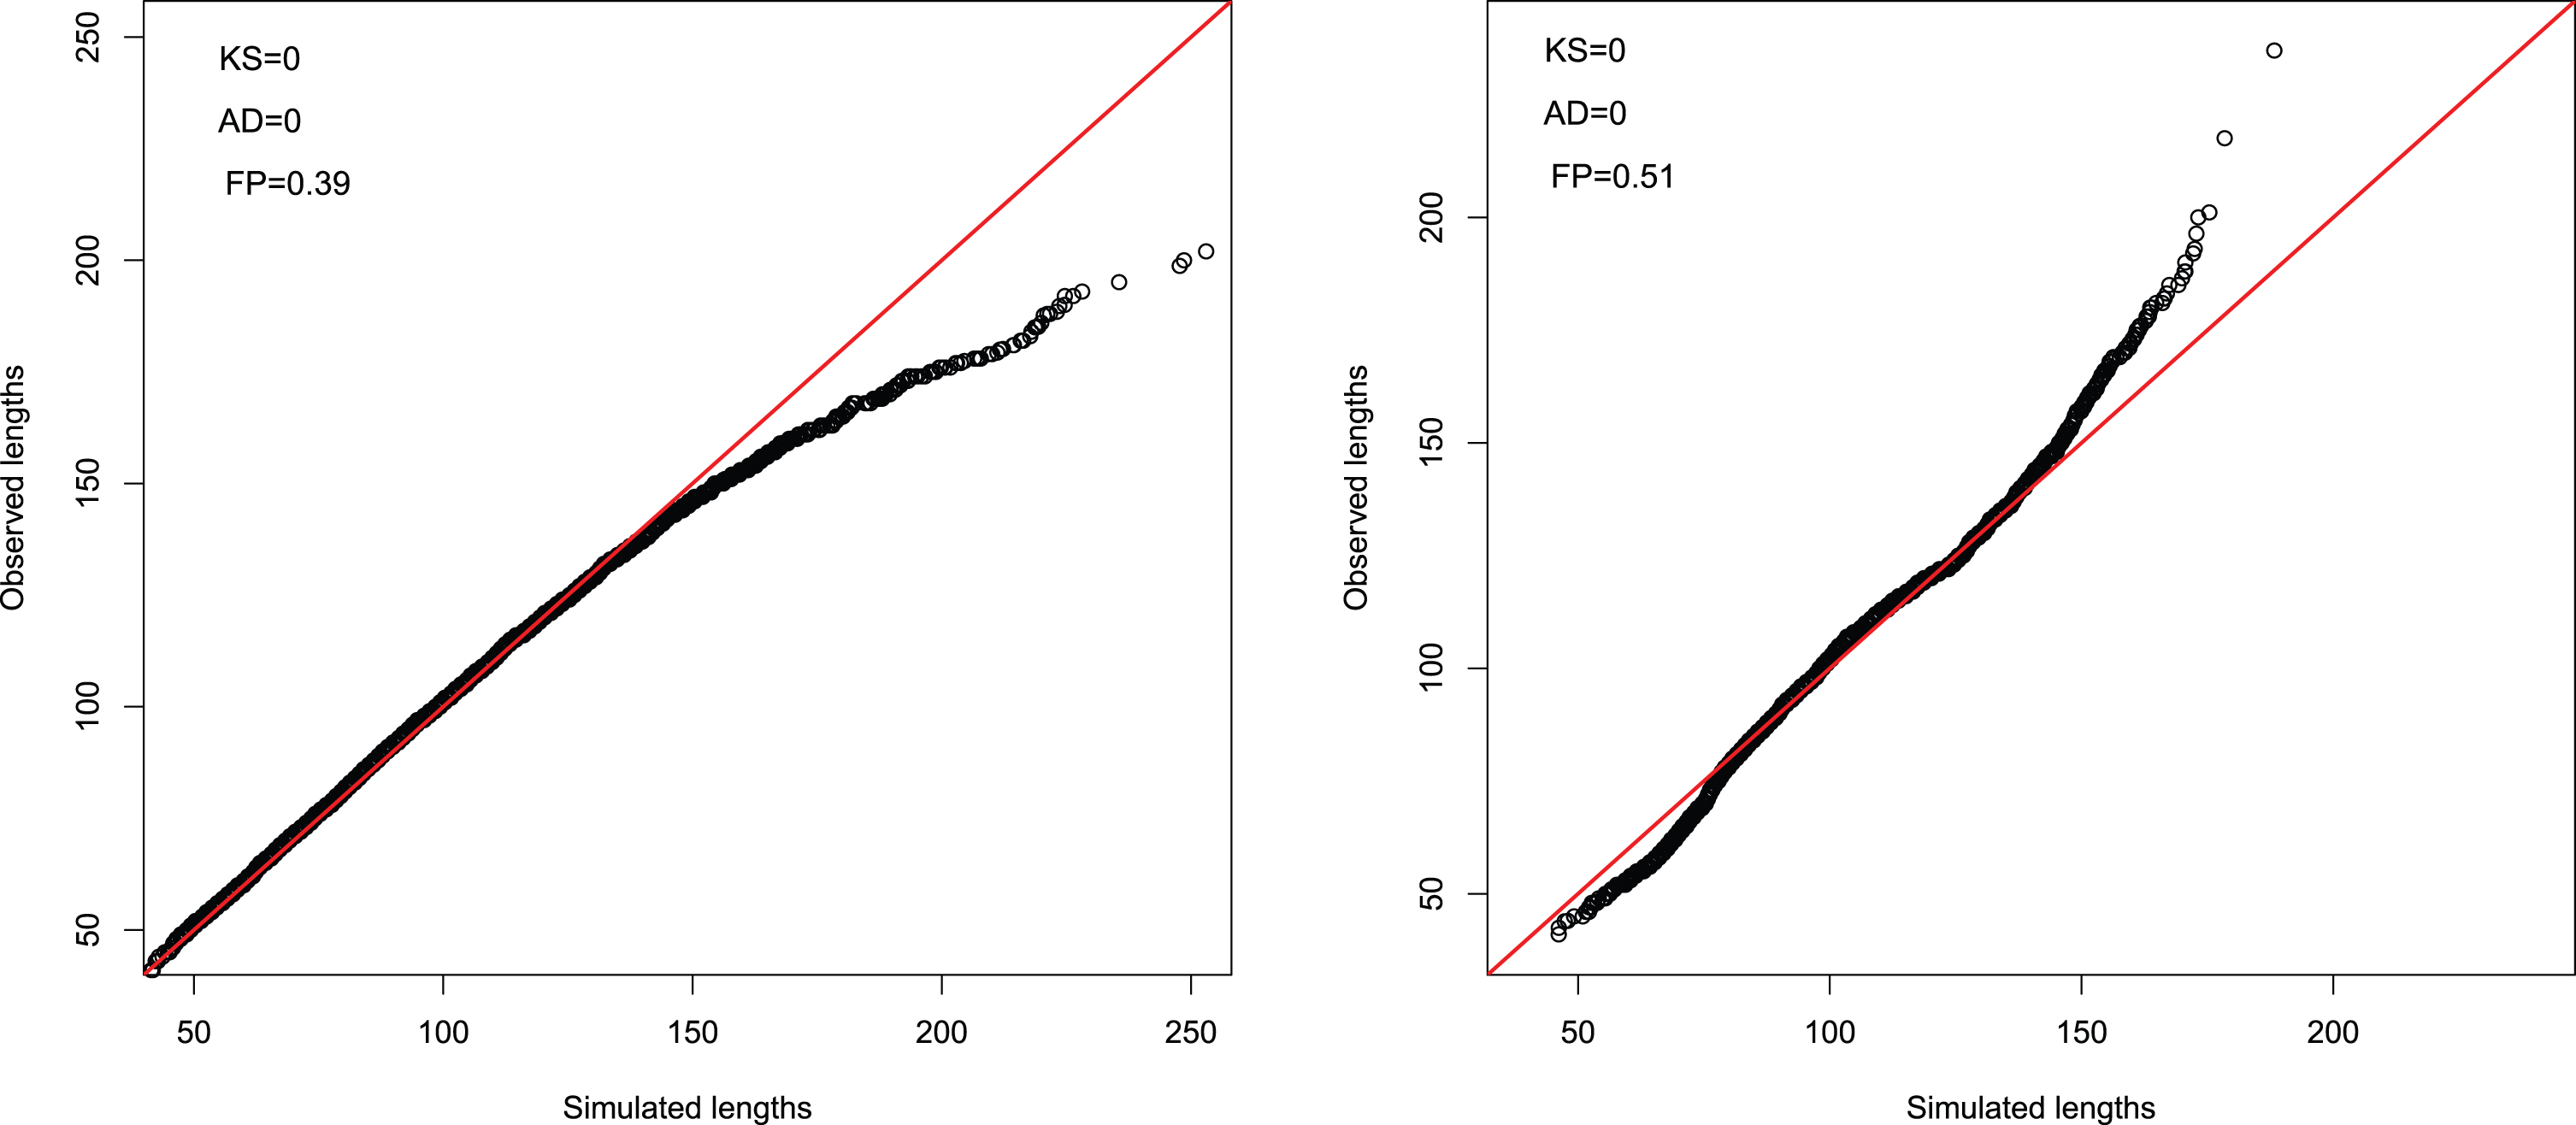 Examples of QQ-plots for which the FP test does not reject while the KS and AD tests do.